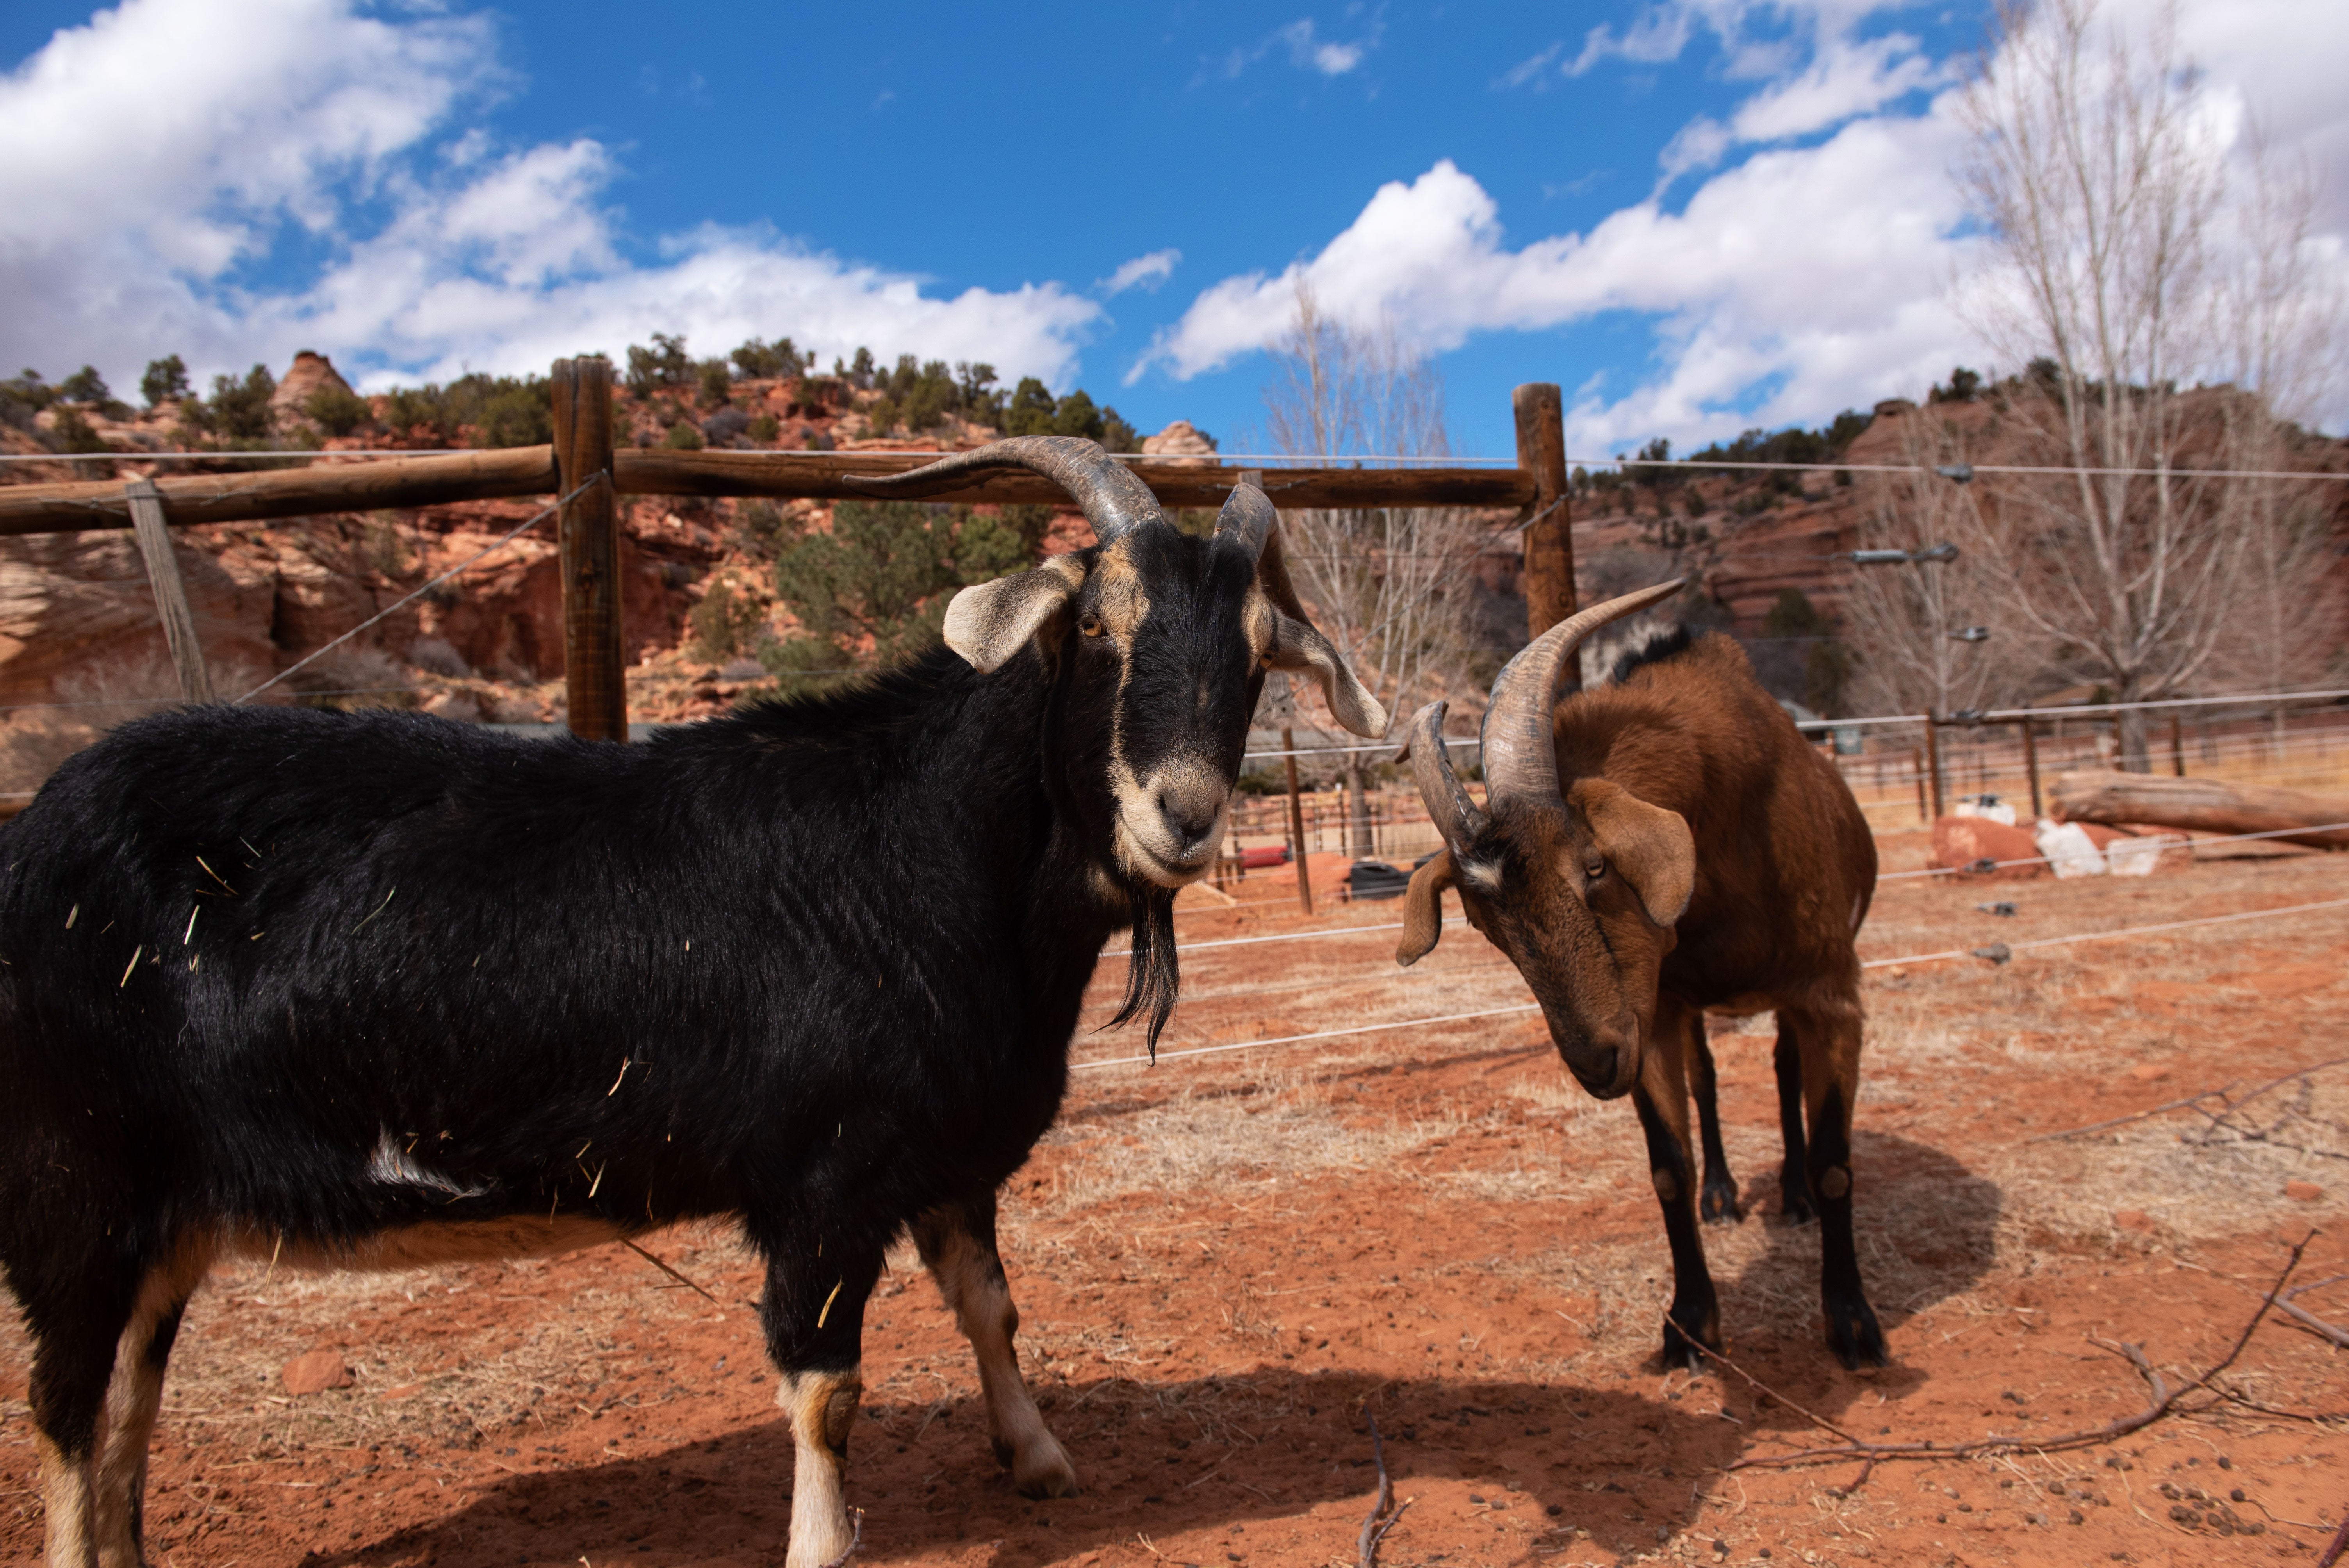 Augustus and Harrison the goats in front of red cliffs, white clouds and blue skies